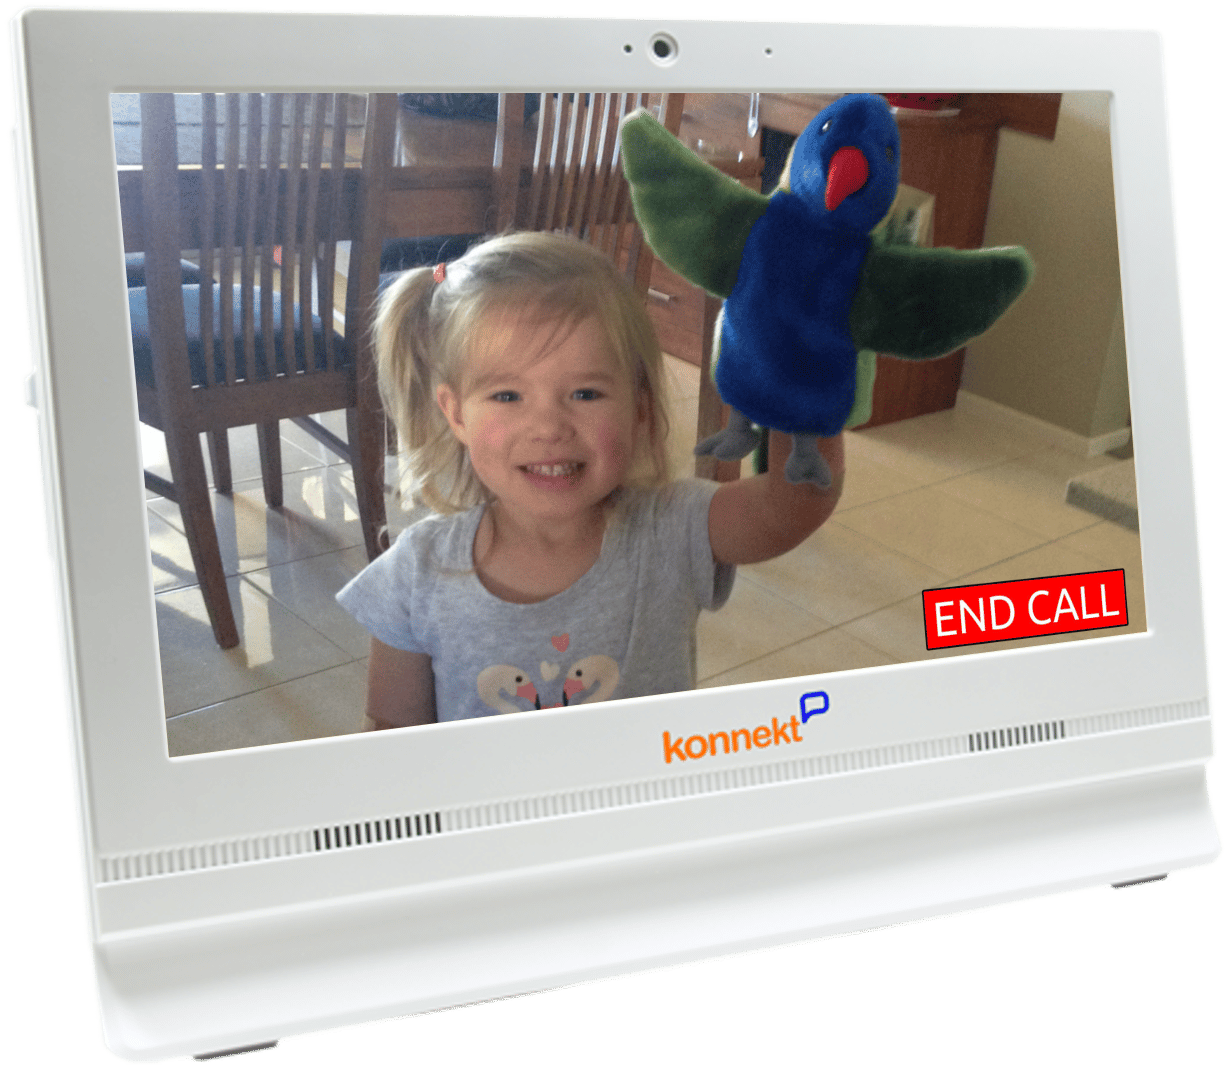 Videophone call with granddaughter who is holding a hand puppet